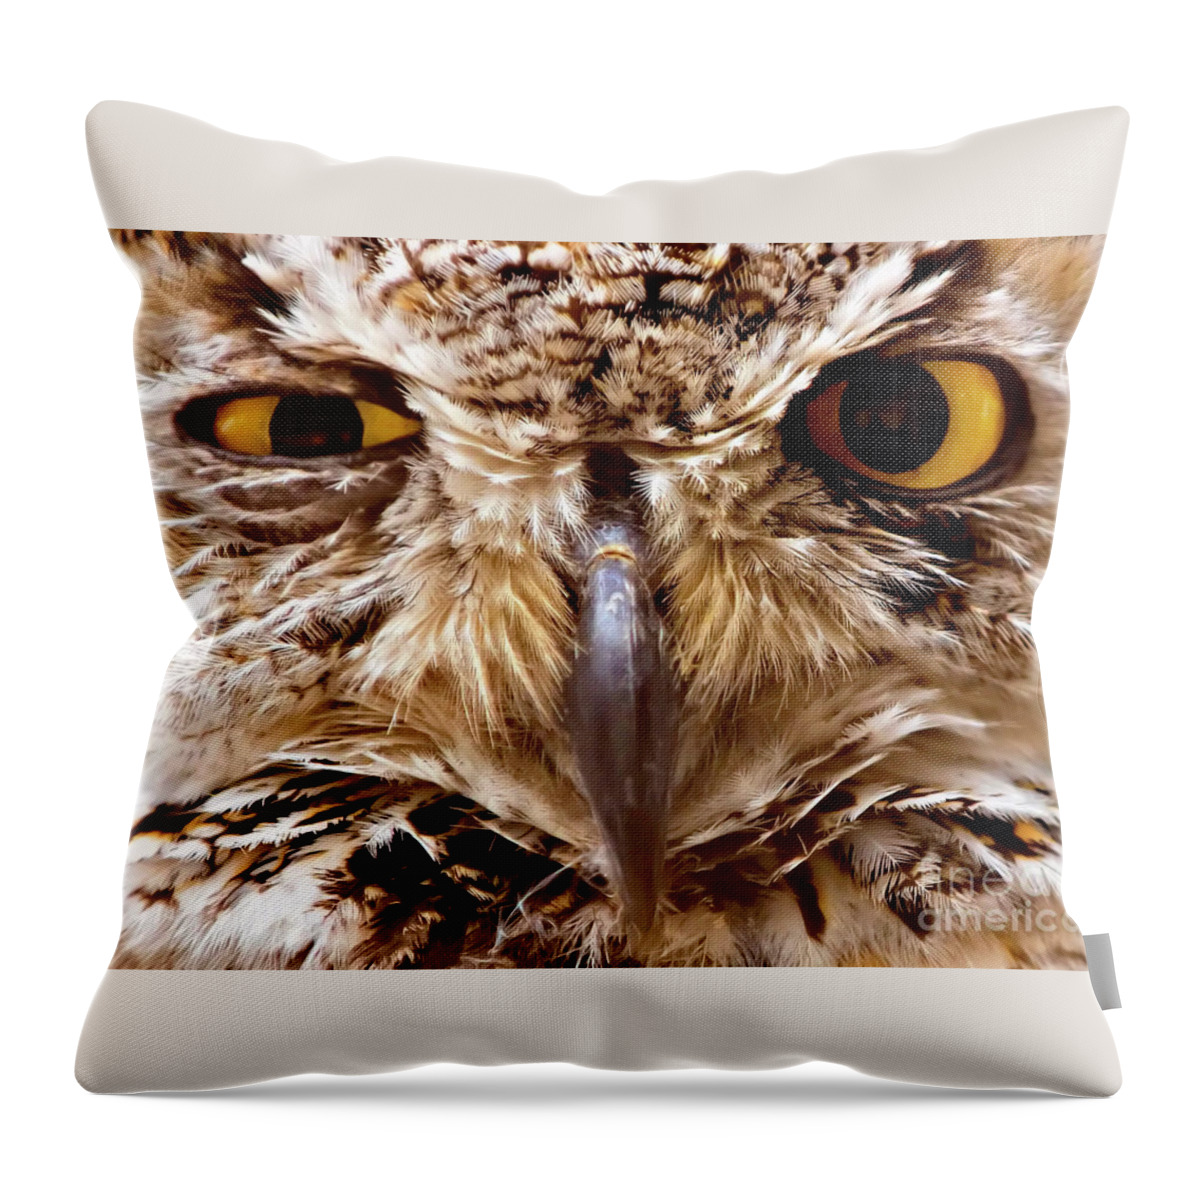 Looking Throw Pillow featuring the photograph Sassy Owl by Bill Frische